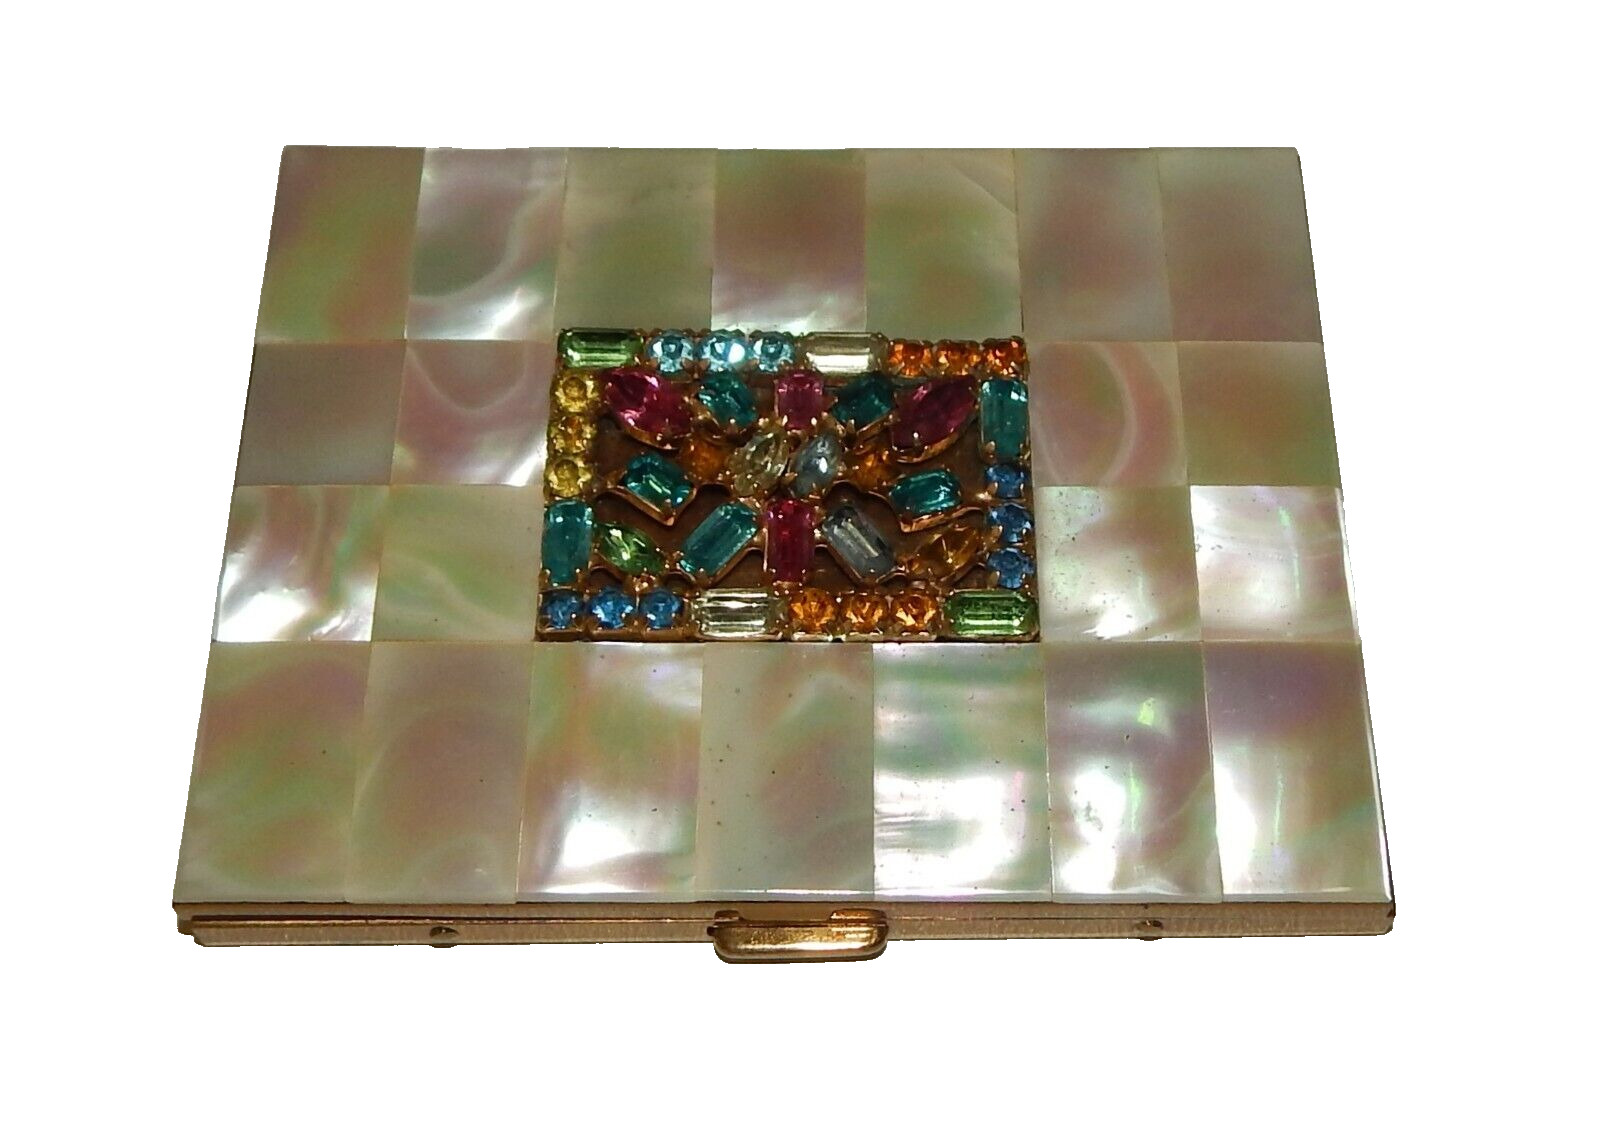 Vintage 1950's Marhill Mother-of-Pearl Jewled Cigarette Case Compact